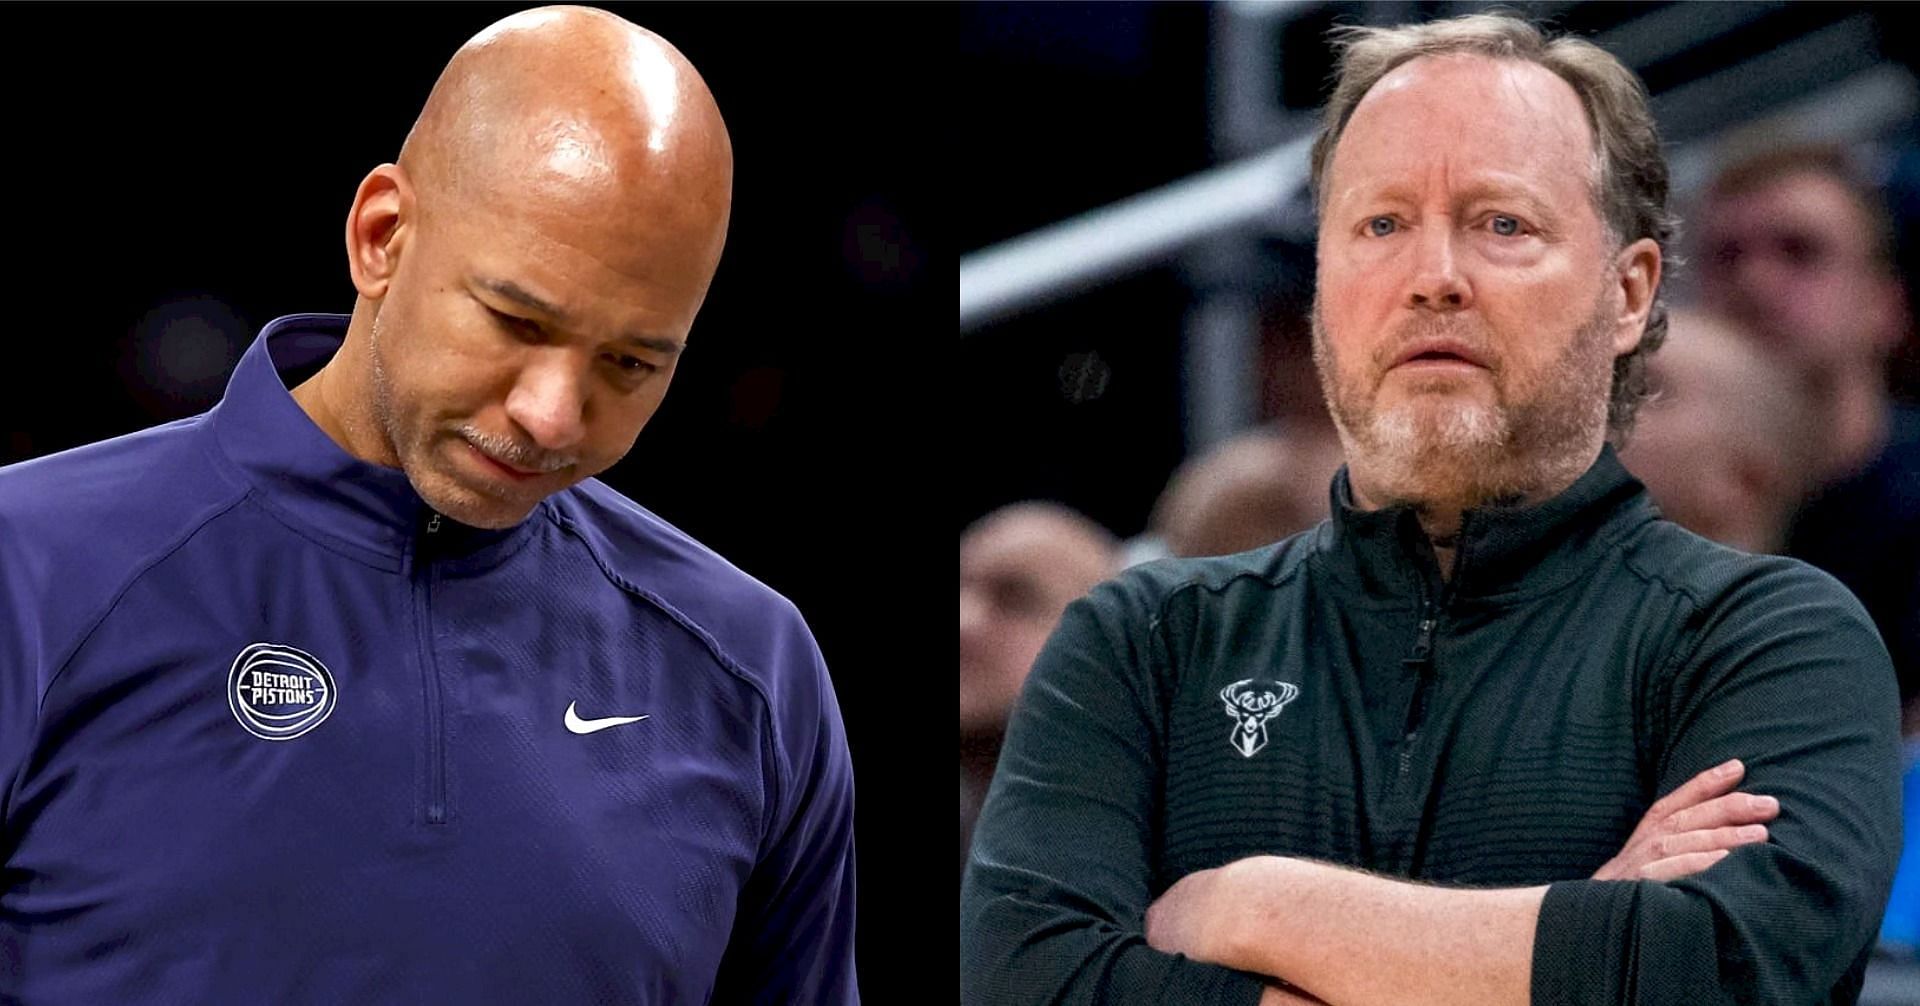 Detroit Pistons coach Monty Williams (left) and former Milwaukee Bucks coach Mike Budenholzer (right) (H/T Trevor Ruszkowski-USA TODAY Sports)